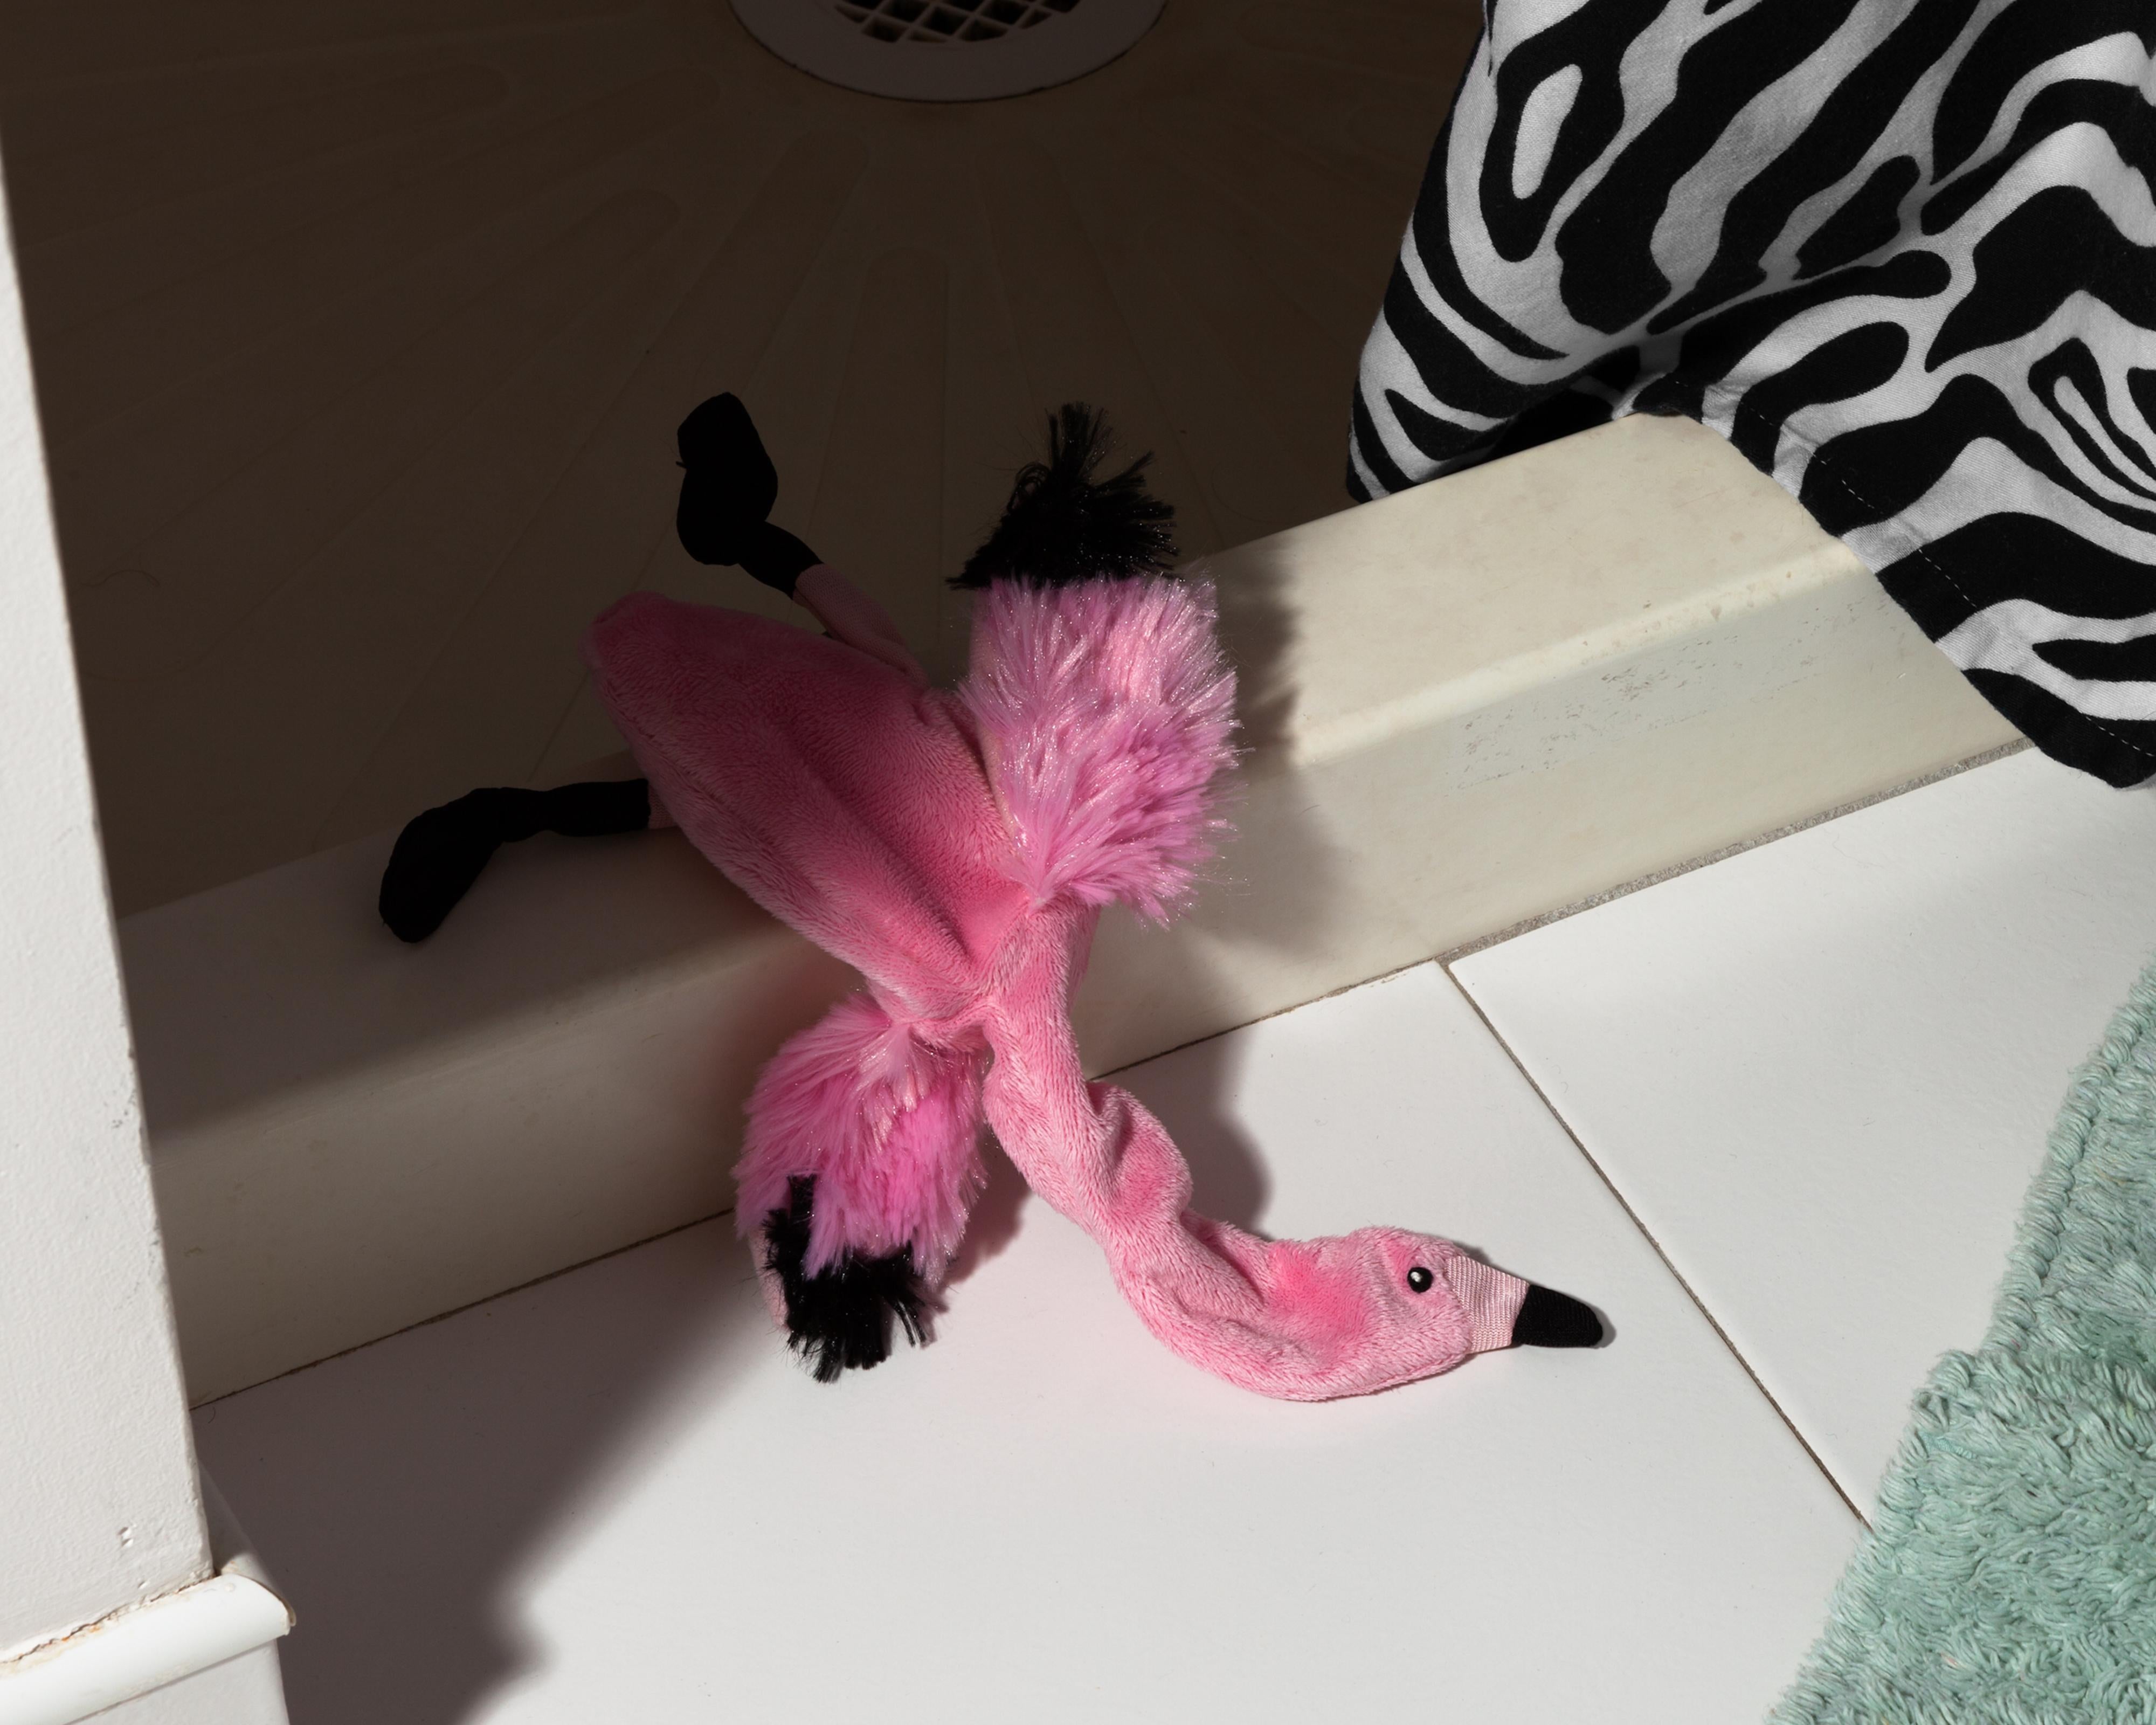 “Morbidity & Mortality: Flamingo” Humorous Photograph of Dog Toy in Crime Scene - Black Color Photograph by Jeanette May